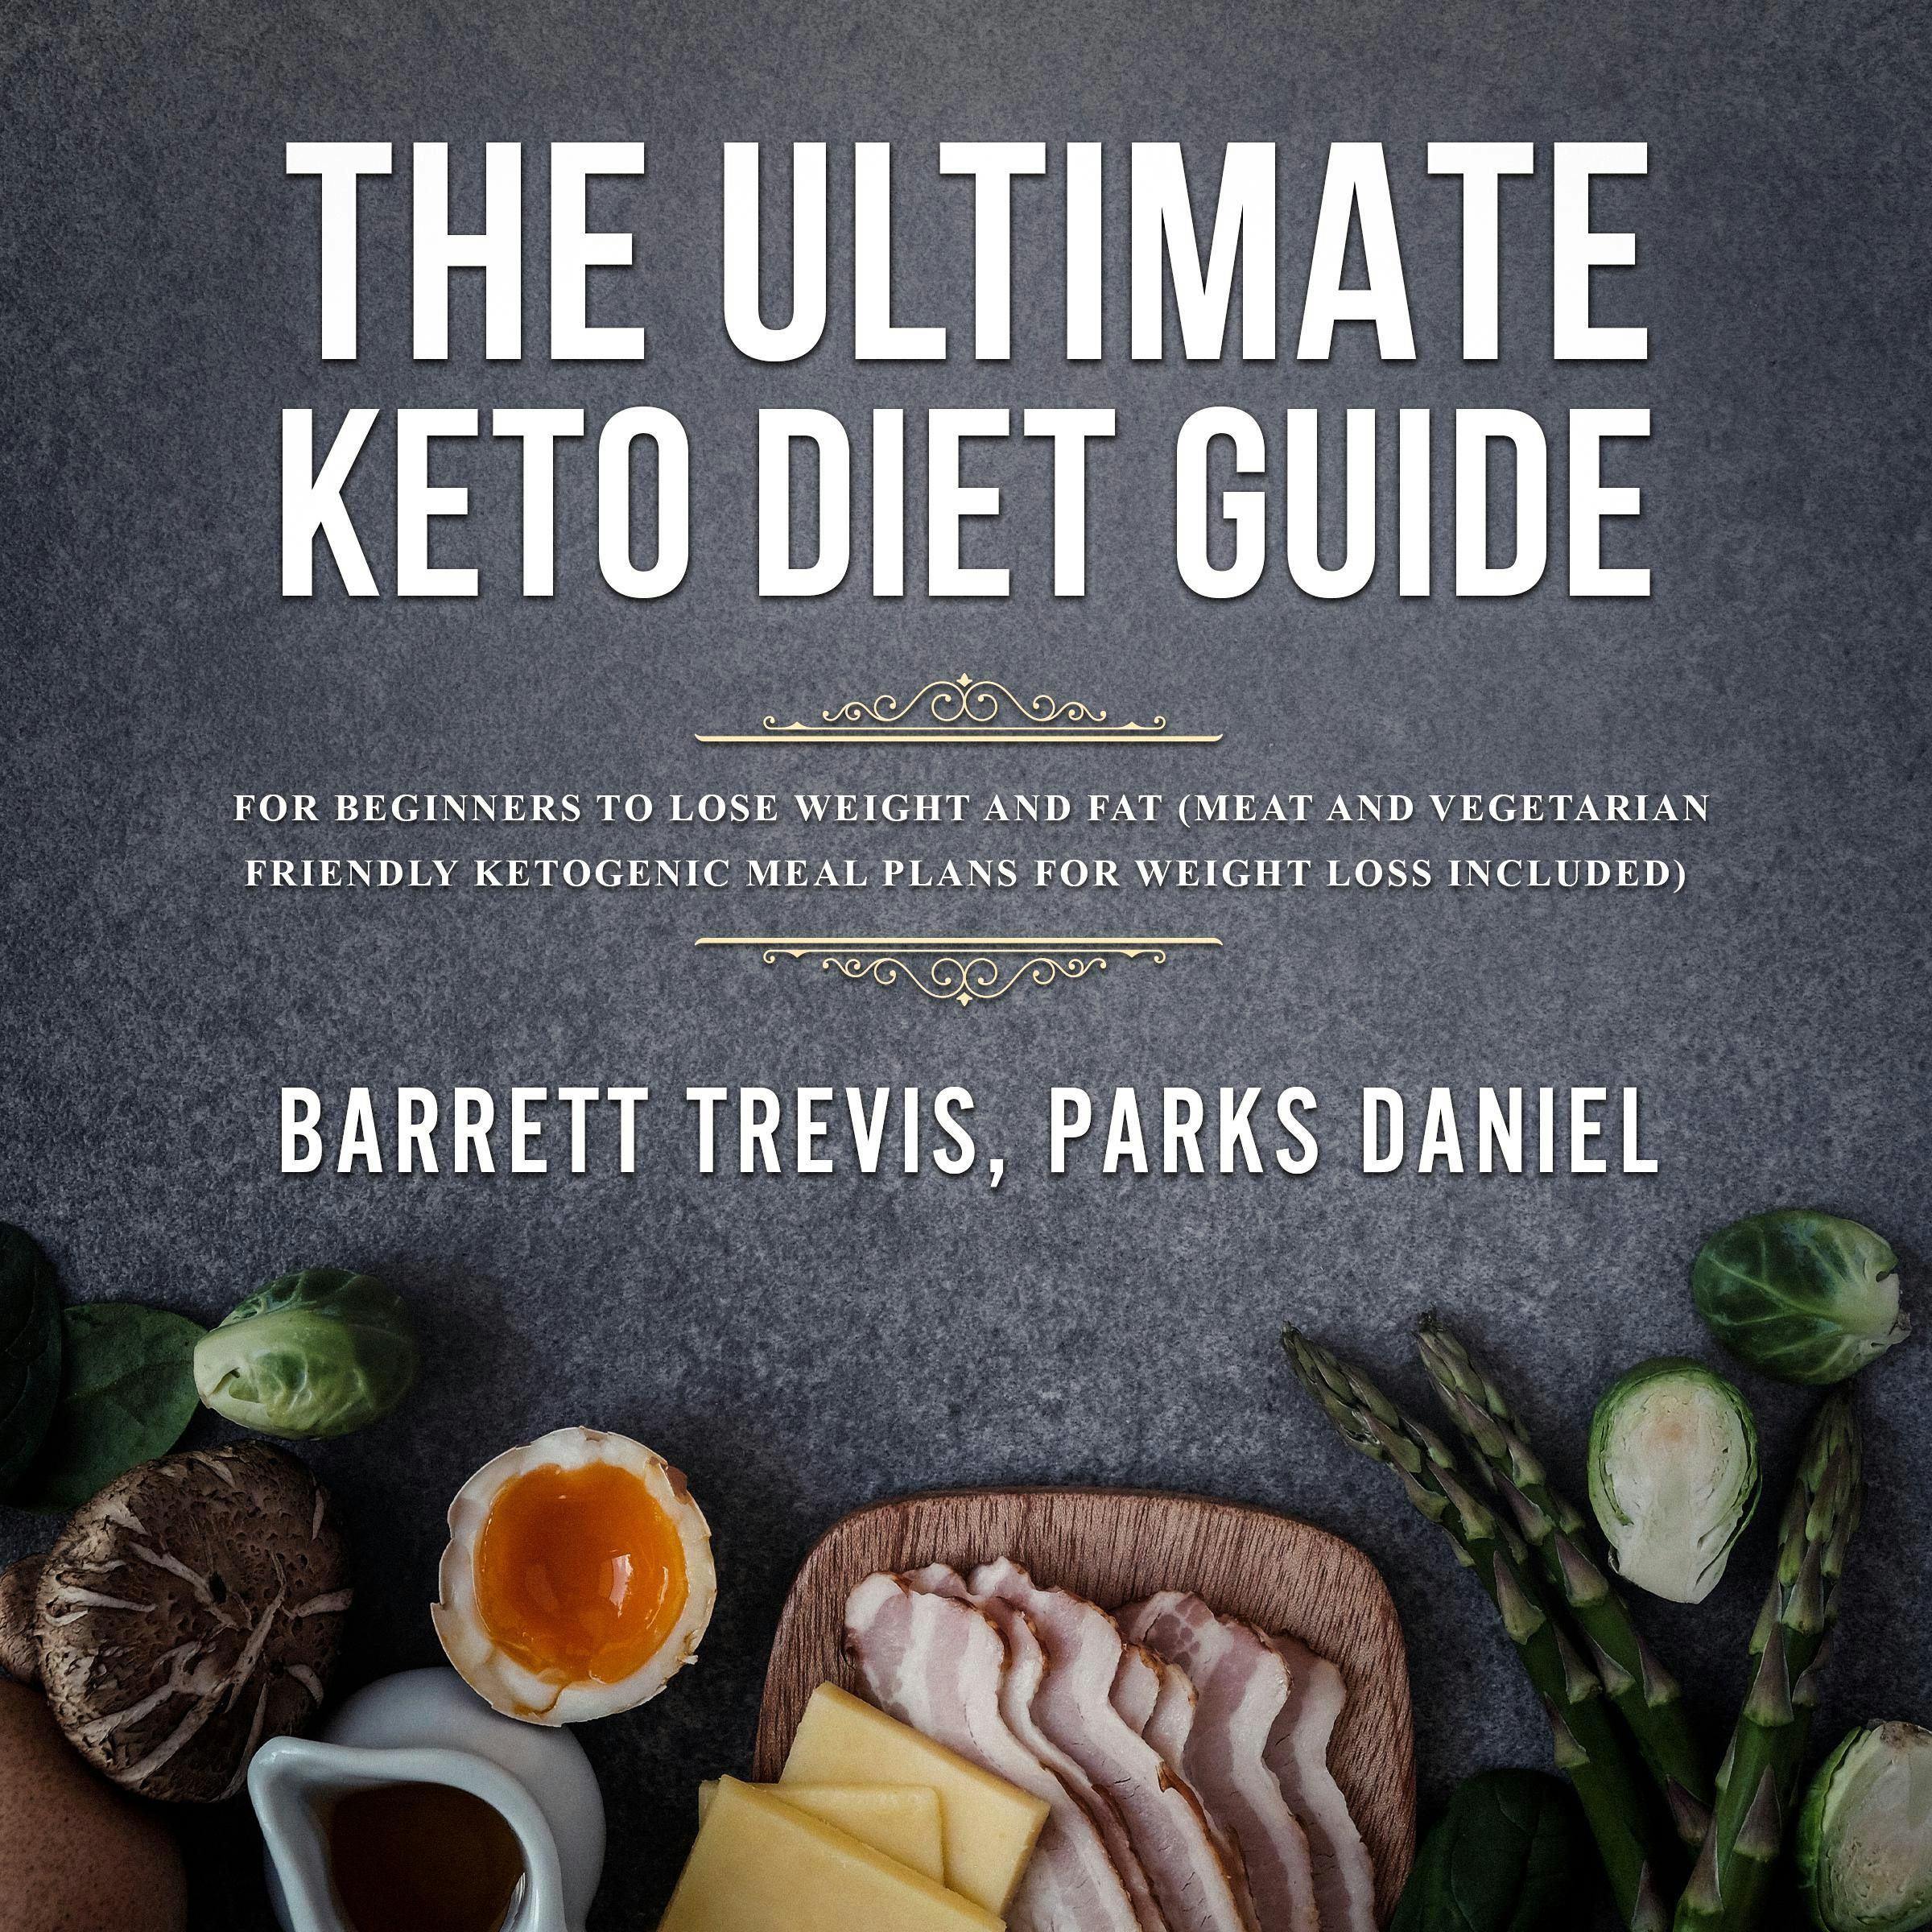 The Ultimate Keto Diet Guide for Beginners to lose Weight and Fat: Meat and Vegetarian Friendly Ketogenic Meal Plans for Weight Loss included - undefined